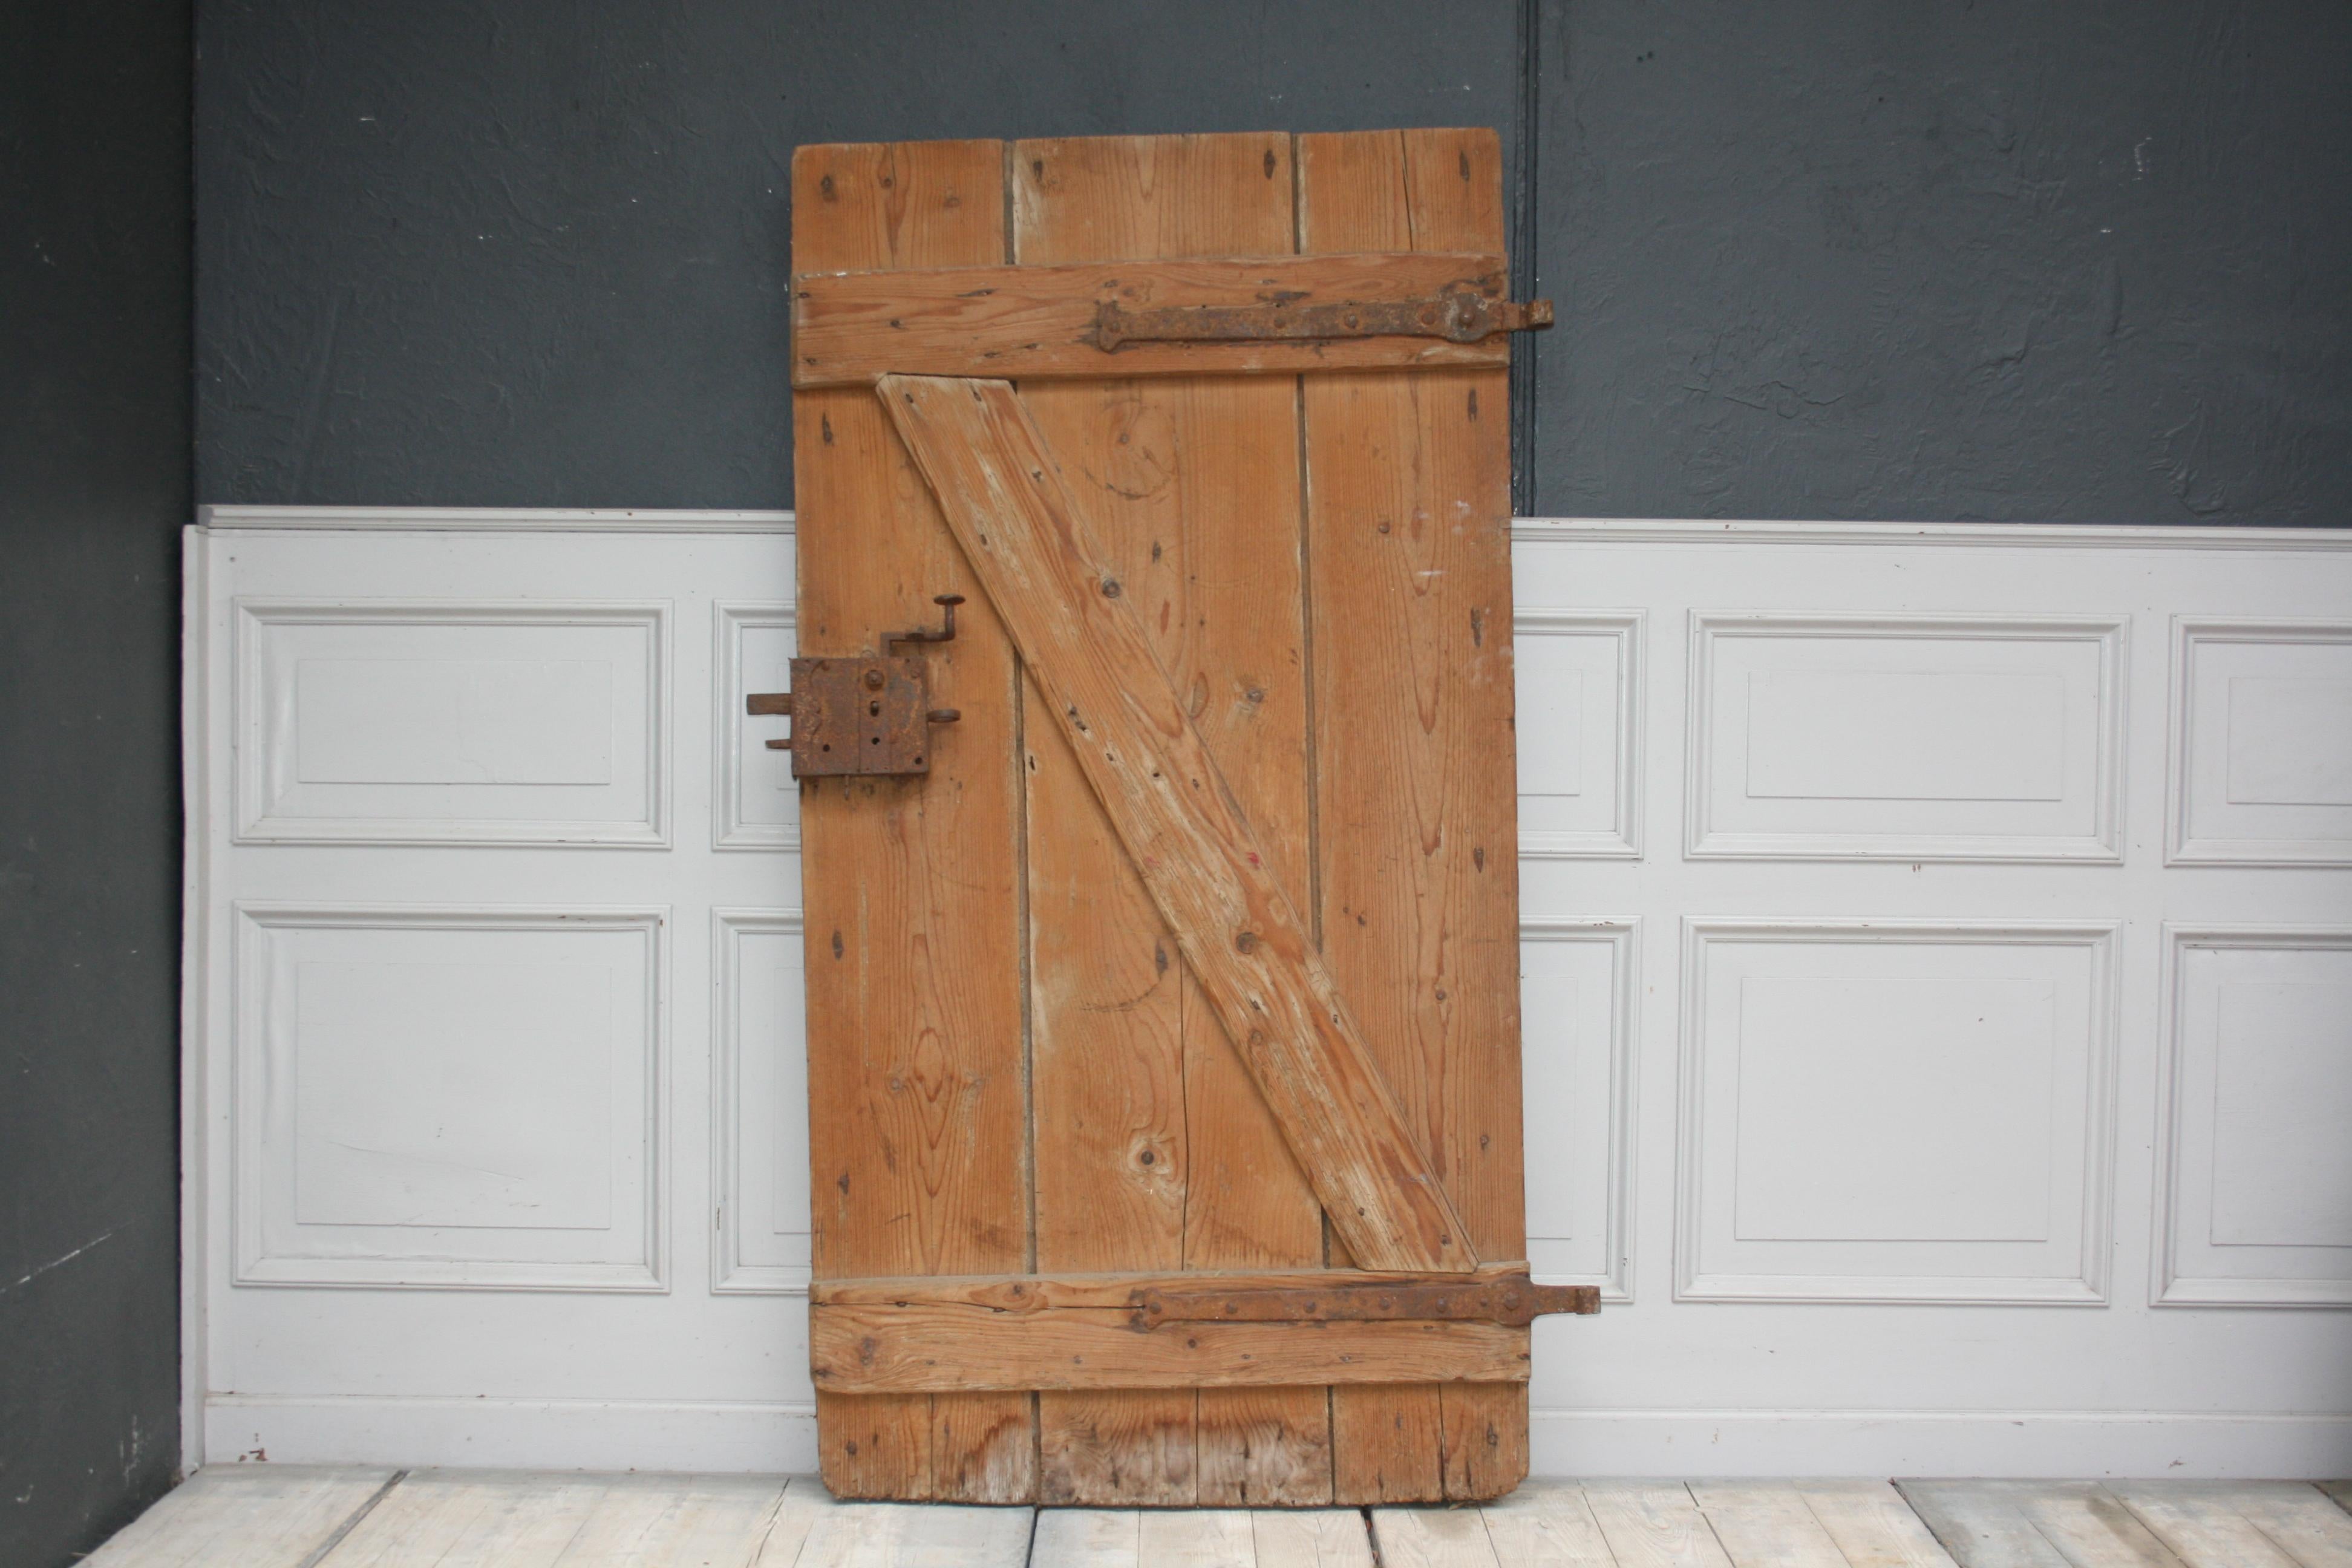 Decorative original antique door. The side of the door that was originally visible to the outside, is made of solid oak and the other side of the door, the inside of the house, is made of fir wood and has a kind of 